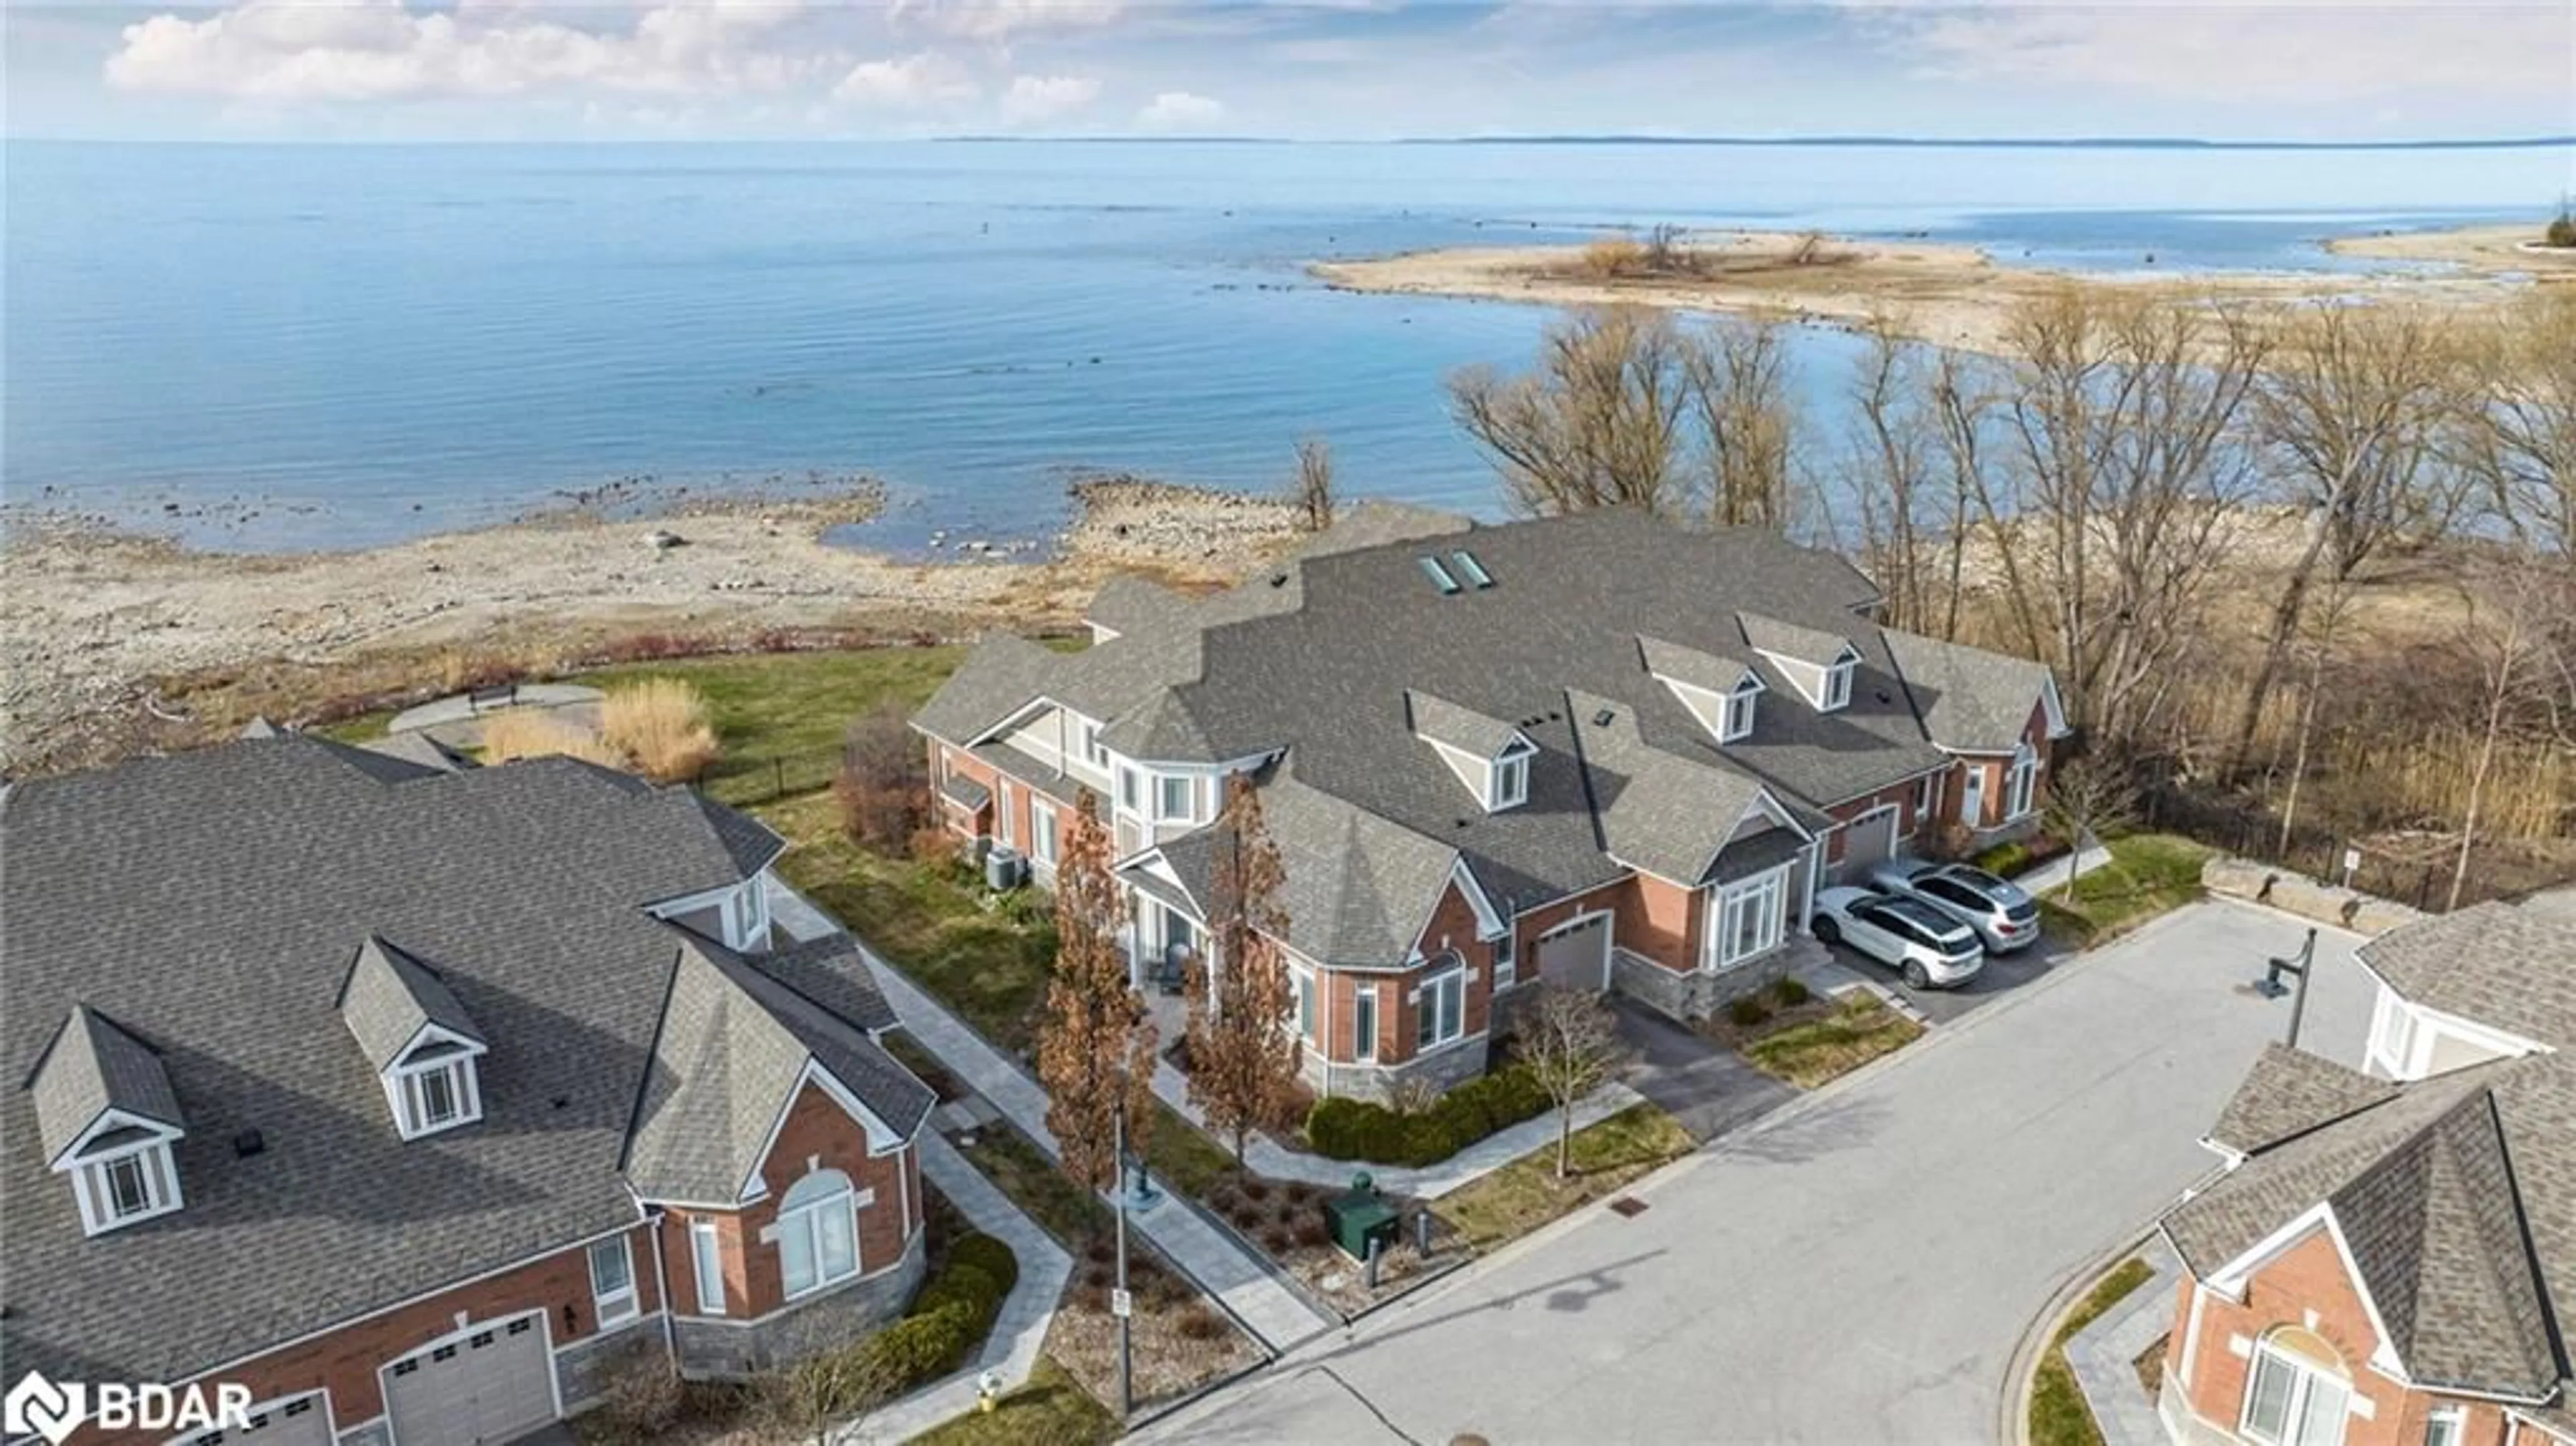 Lakeview for 5 Waterside Lane, Collingwood Ontario L9Y 0E8